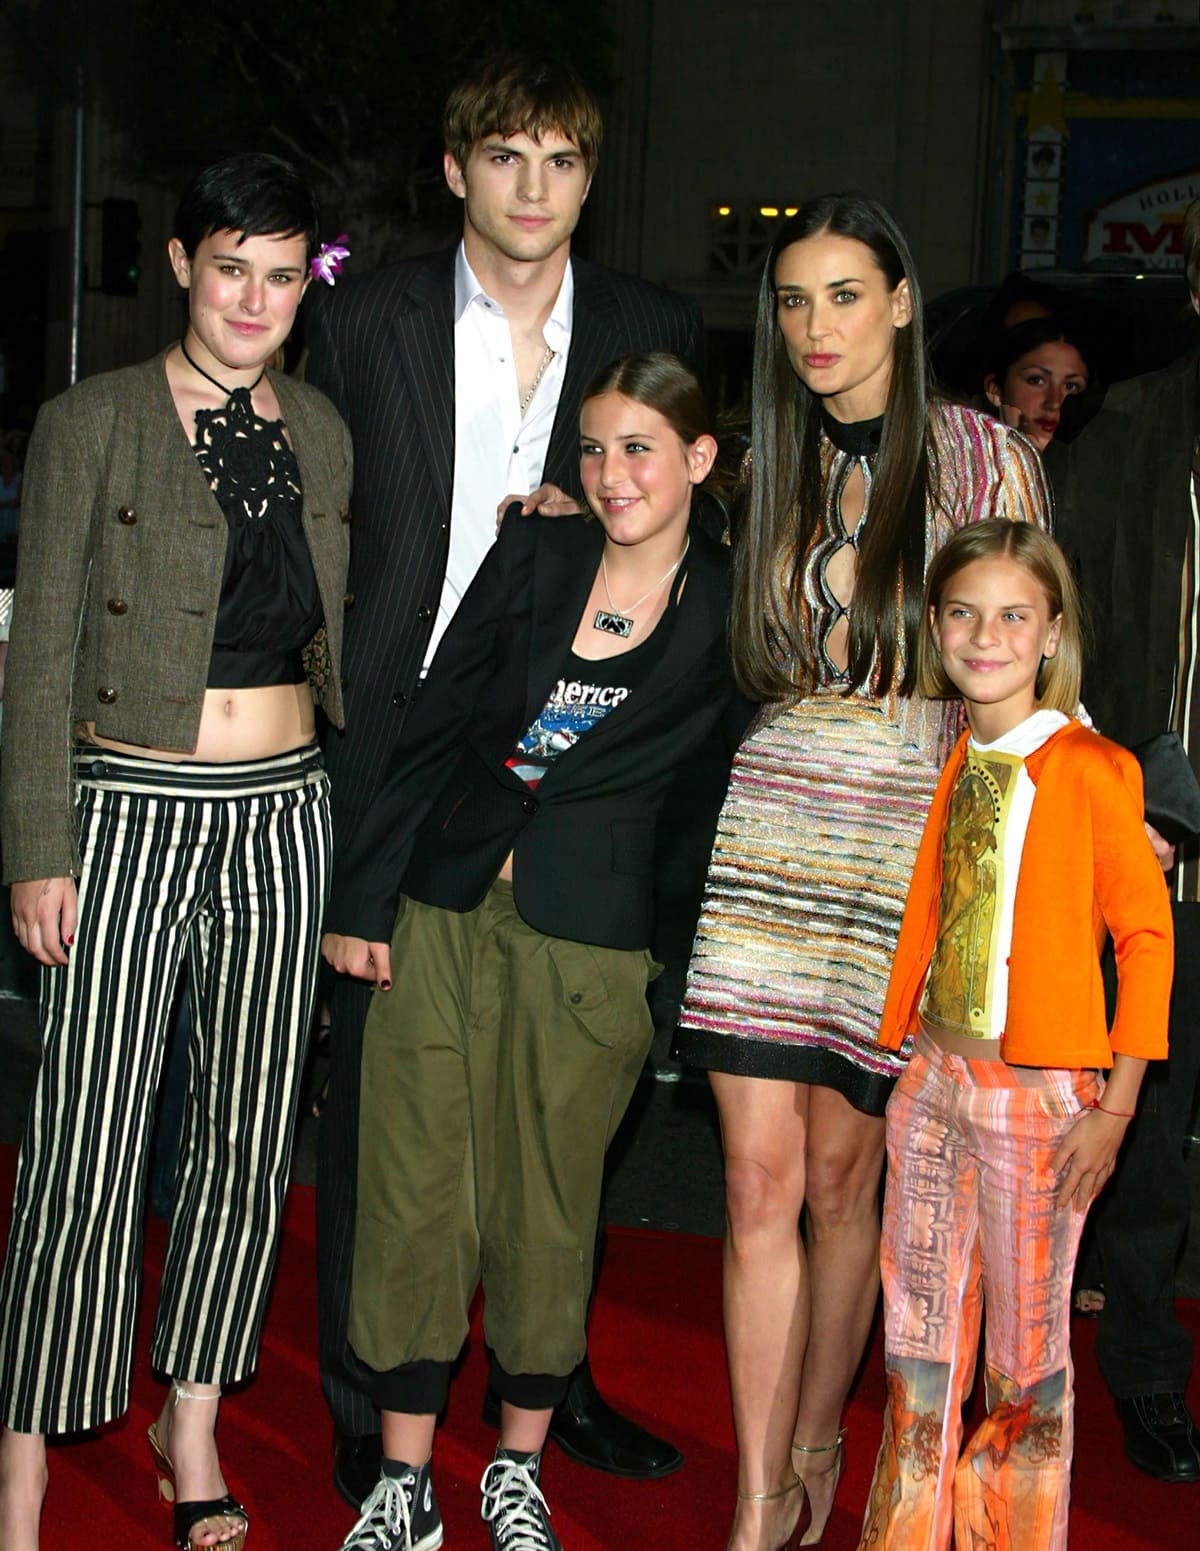 Ashton Kutcher and Demi Moore, once married and notable figures in Hollywood, formed a family with Demi's three daughters - Rumer Willis, Scout Willis, and Tallulah Willis